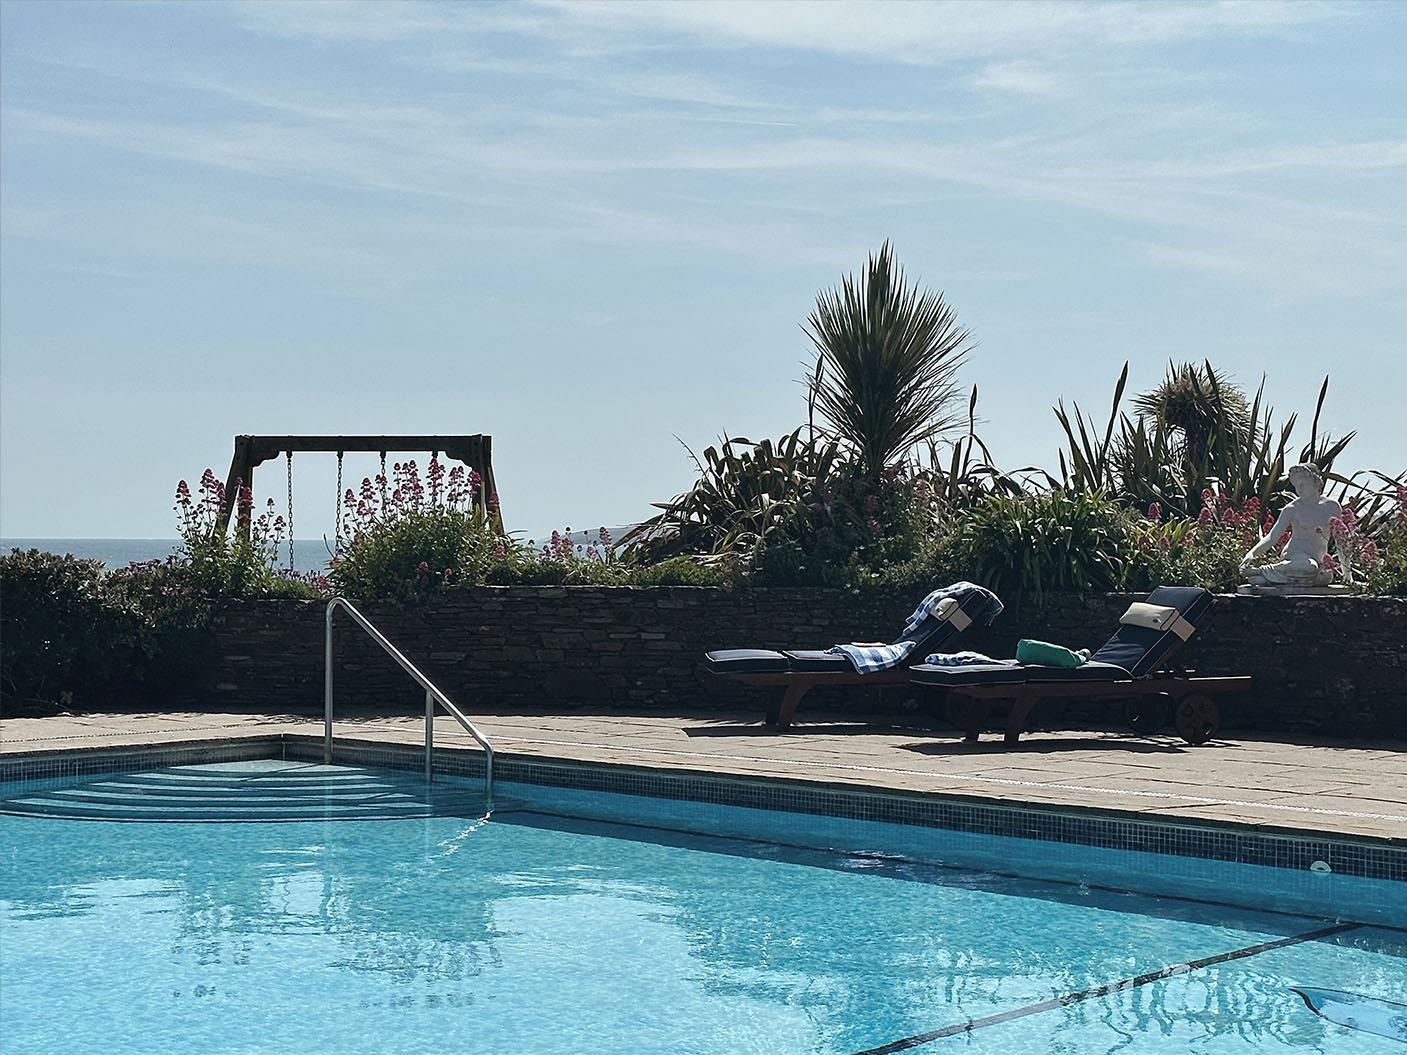 The outdoor swimming pool at Carne Bay Spa